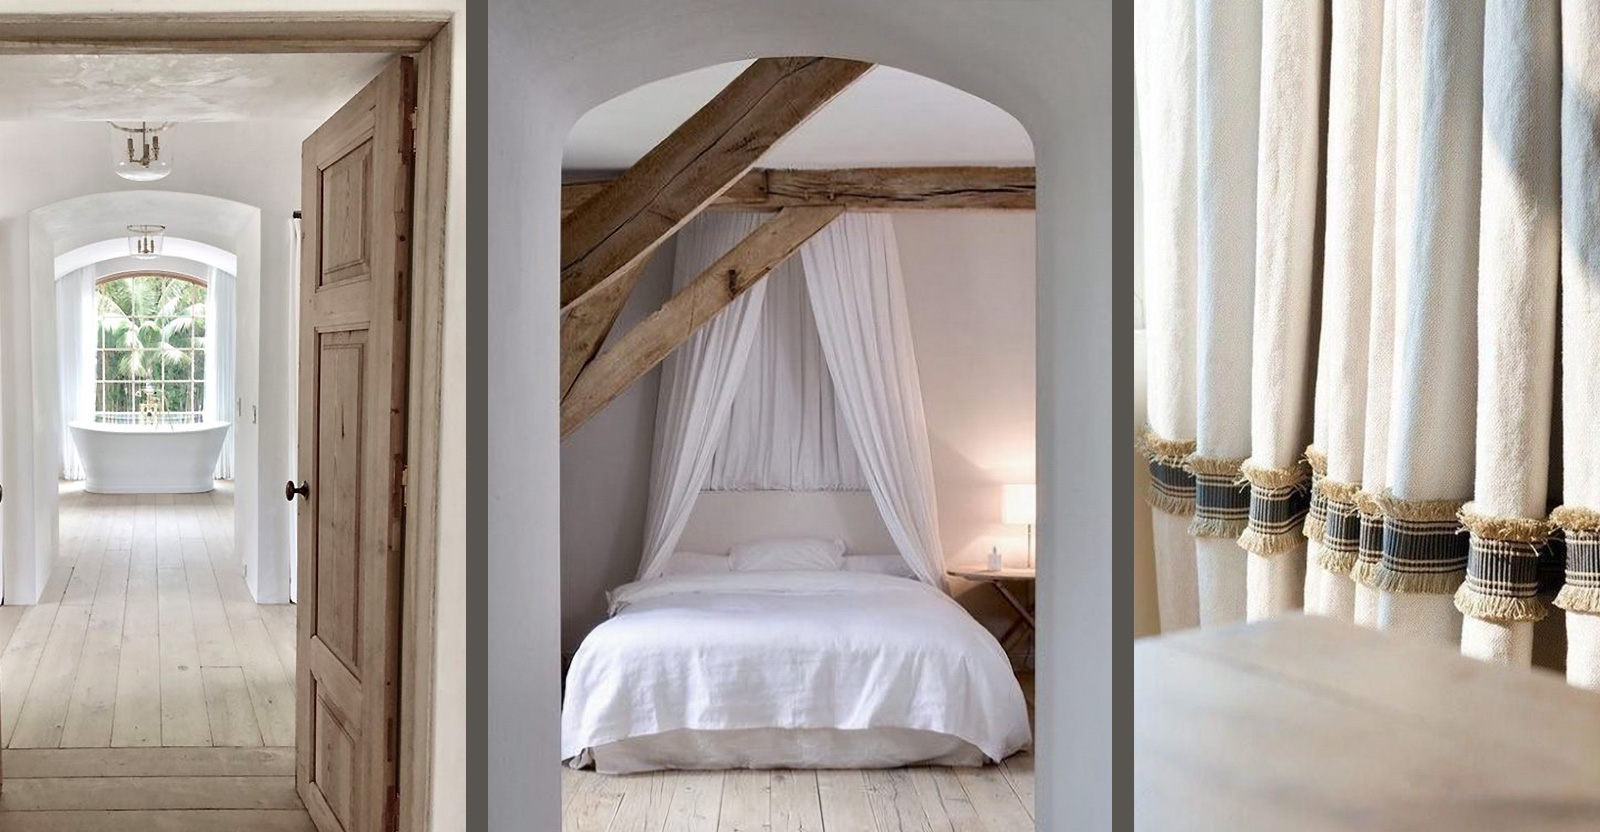 wooden door frame, bedroom with white linens and wooden beams, curtain with detail stiching